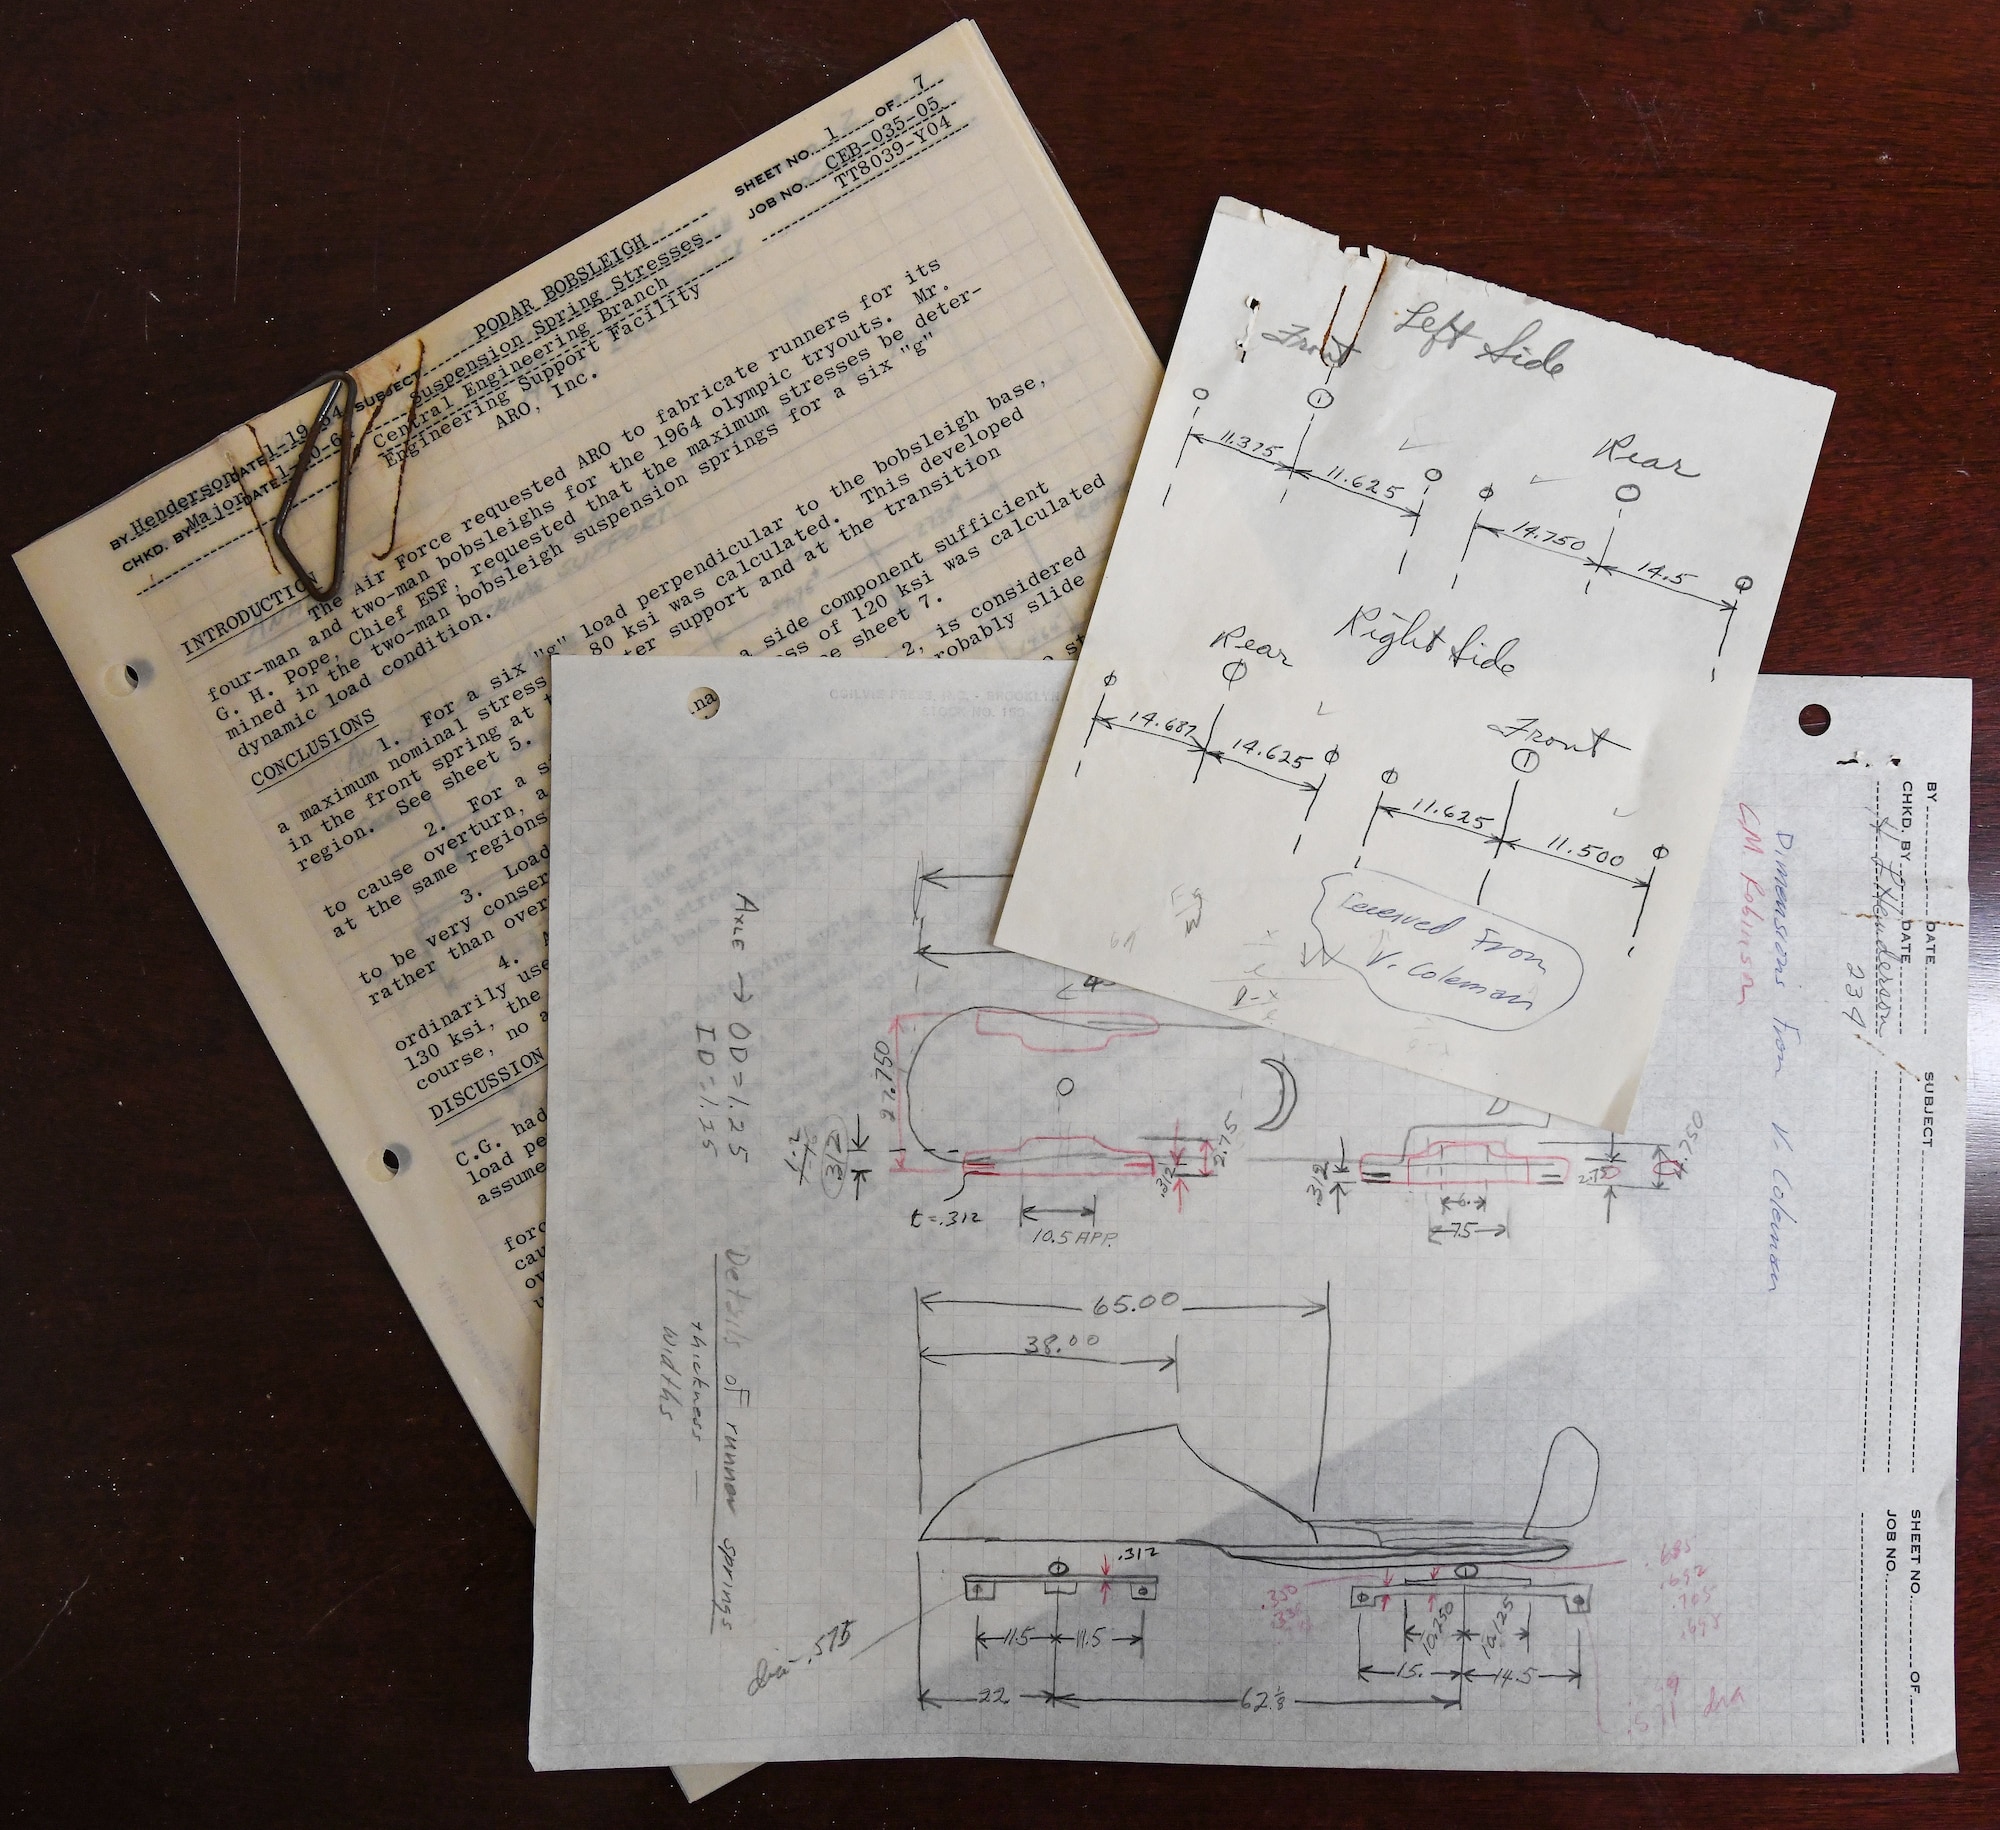 Documents from the early 1960s show Arnold Engineering Development Complex, then Center, provided engineering analysis and materials testing to support the U.S. Air Force bobsled team as they vied for a spot in the 1964 Winter Olympics. AEDC was asked to fabricate runners, the skate-like blades on which bobsleds slide, for the Air Force’s two-man and four-man bobsleds, prompting the AEDC examination of the equipment. (U.S. Air Force photo by Jill Pickett)